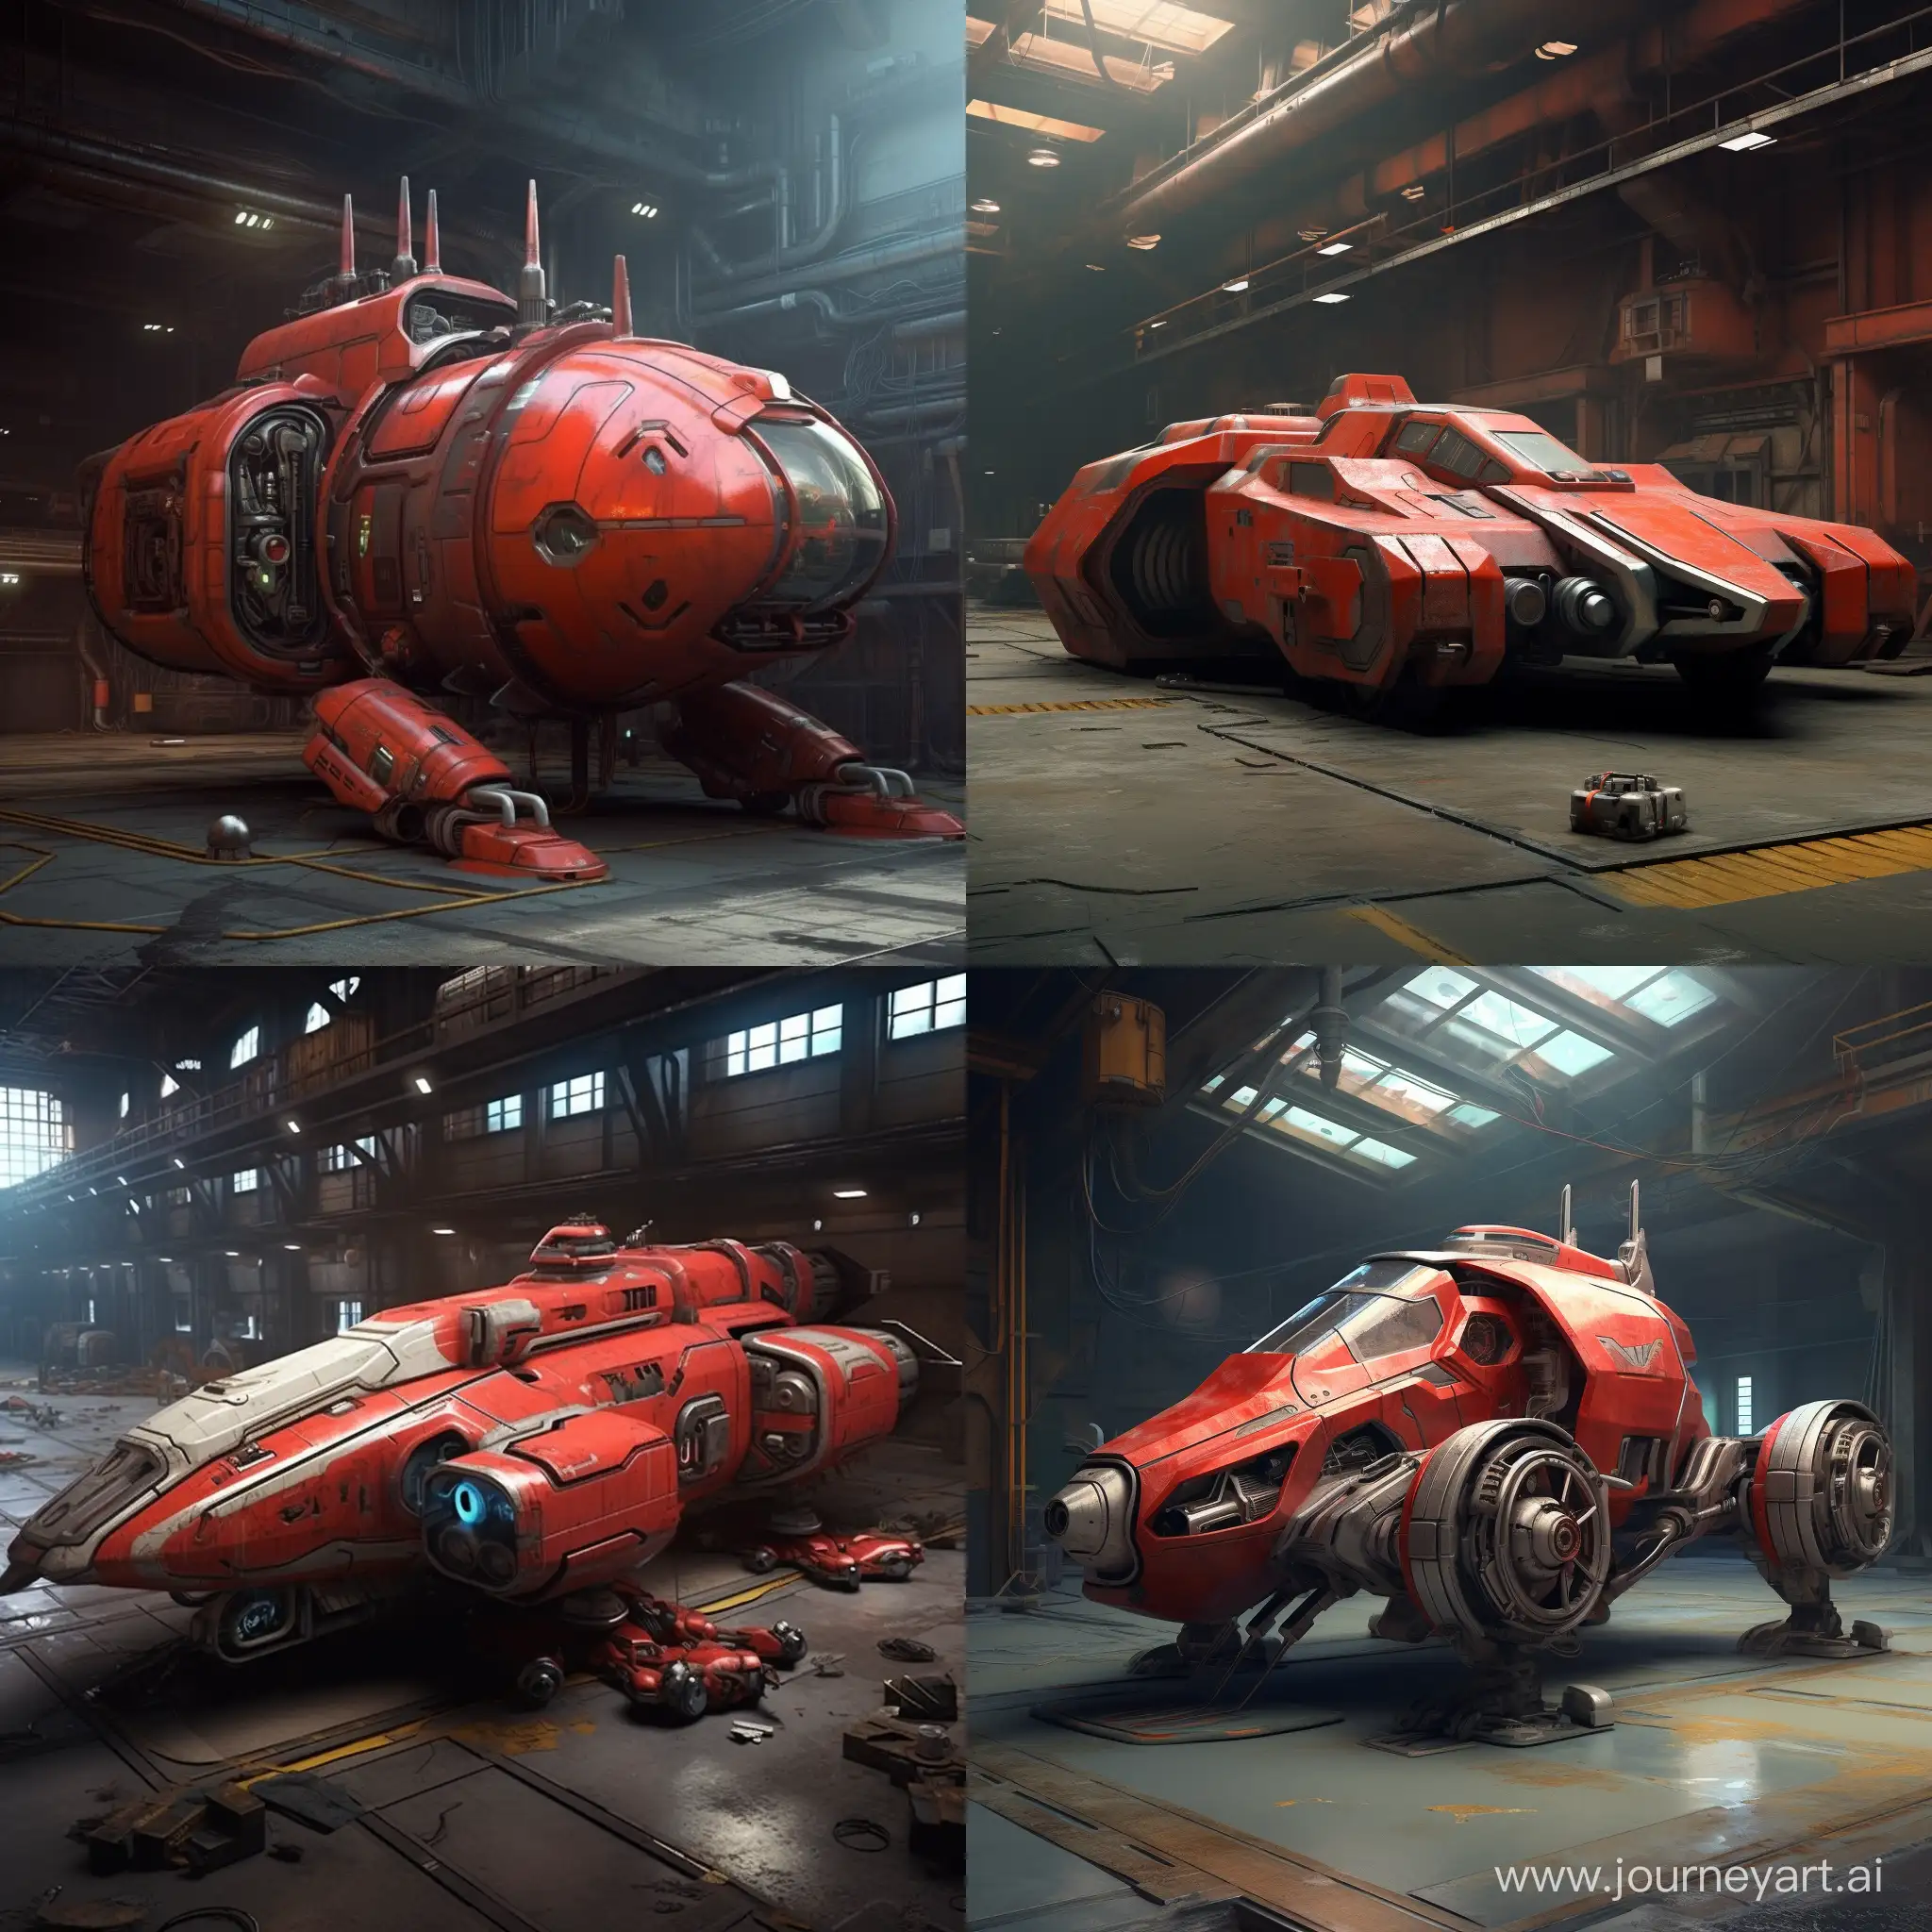 Red spacecraft, retro sci-fi style. Rough industrial details, long fenders.
